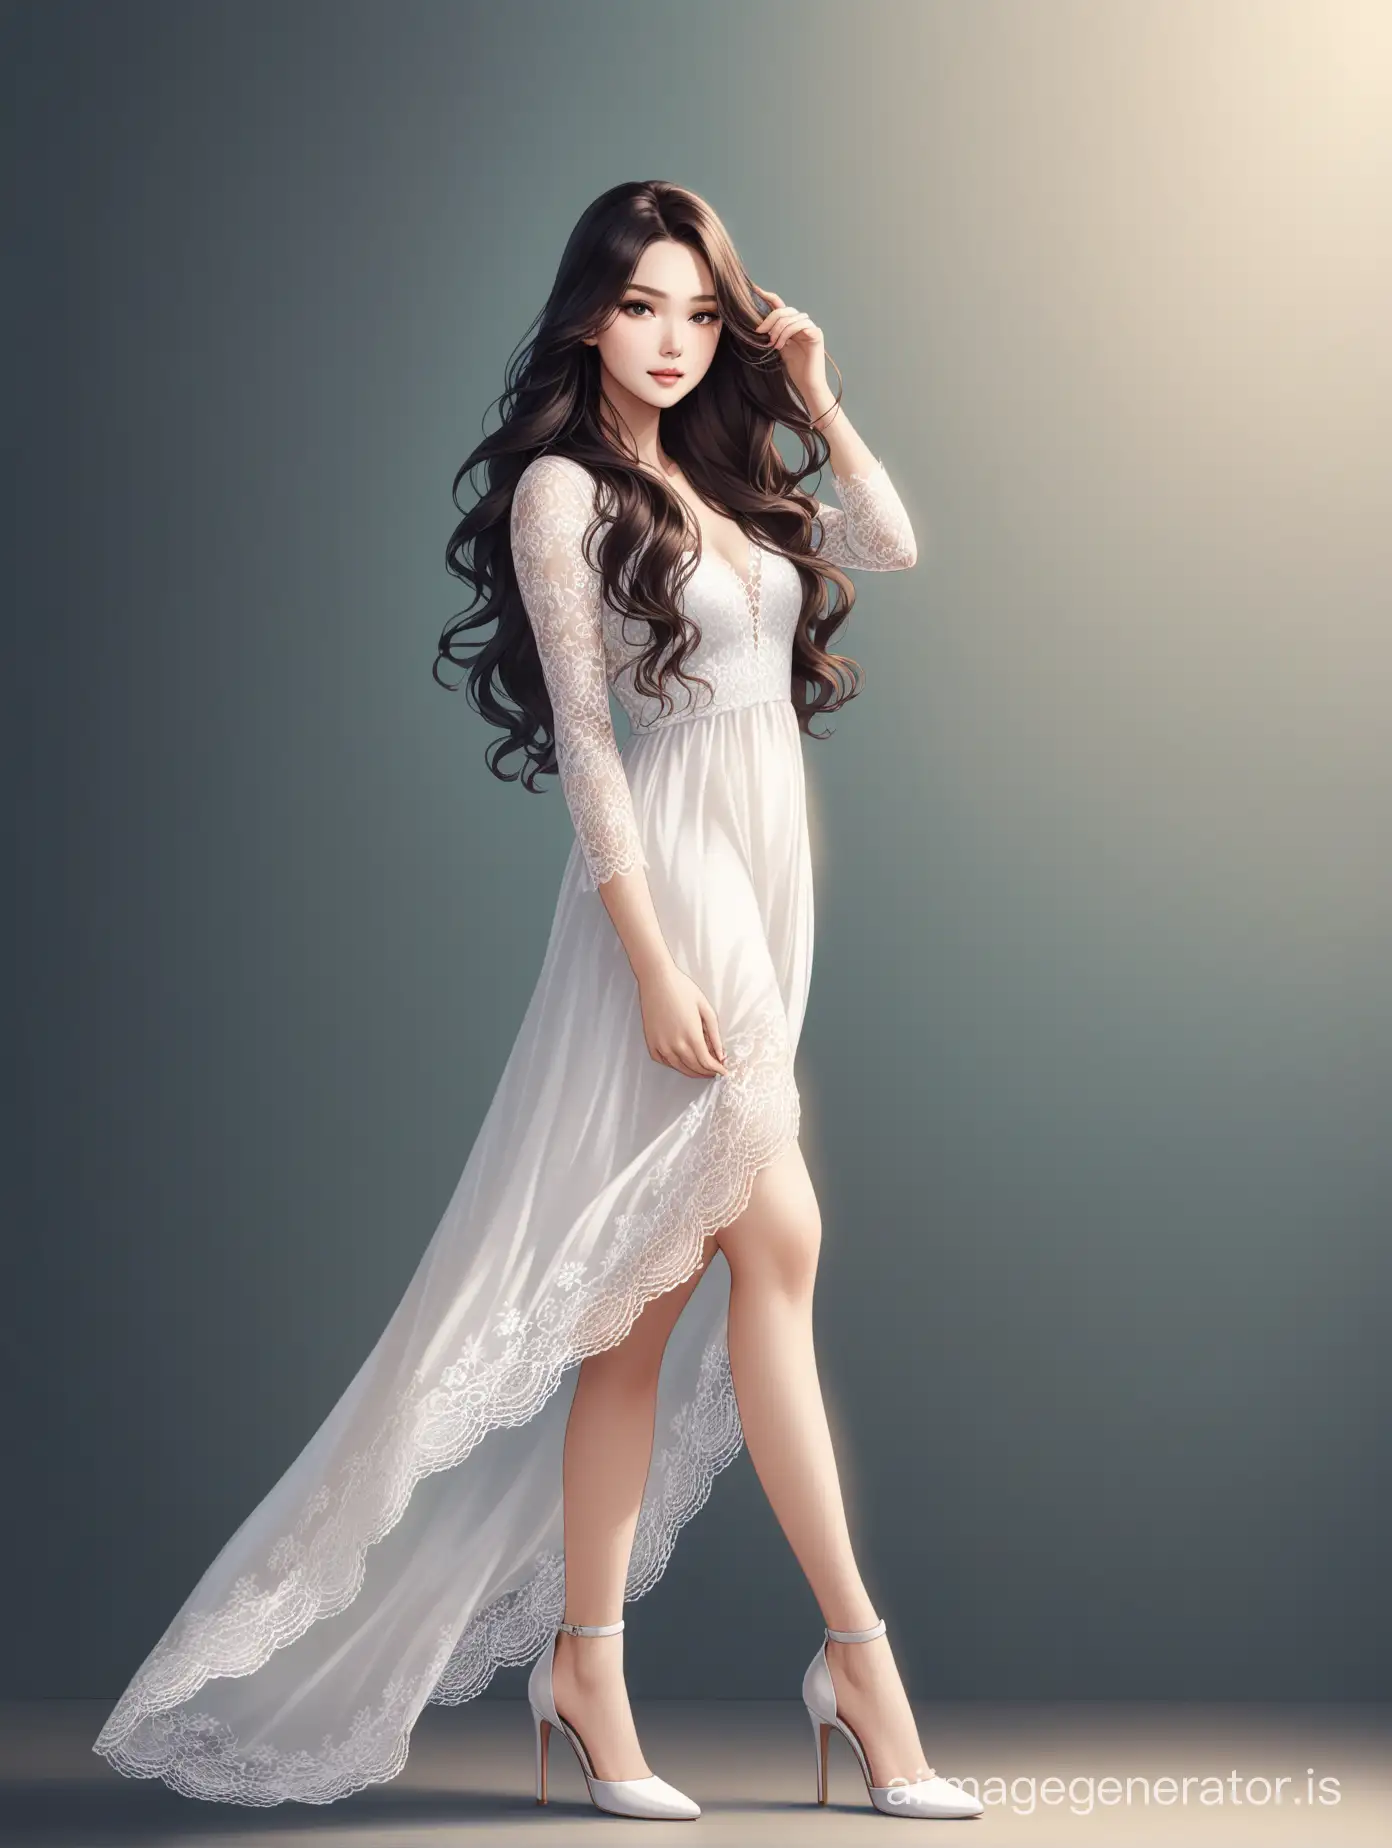 beautiful woman, dark long wavy and loose hair, wearing a lace white dress, in high-heeled shoes